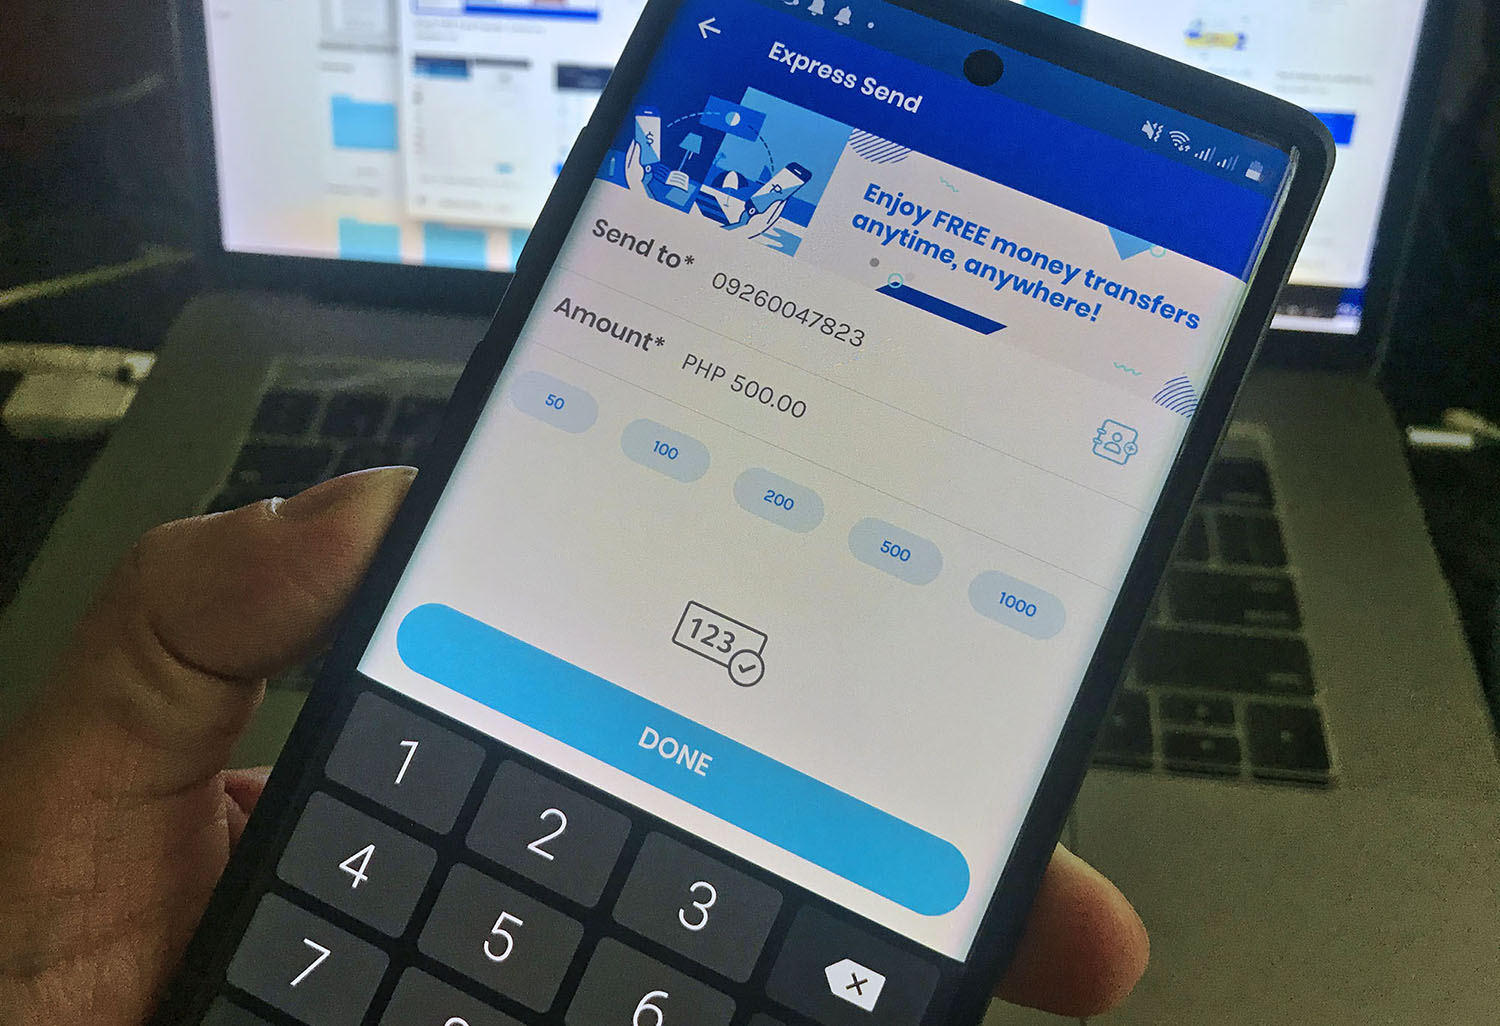 GCash Send Money offers cashless transfer and safer amid GCQ